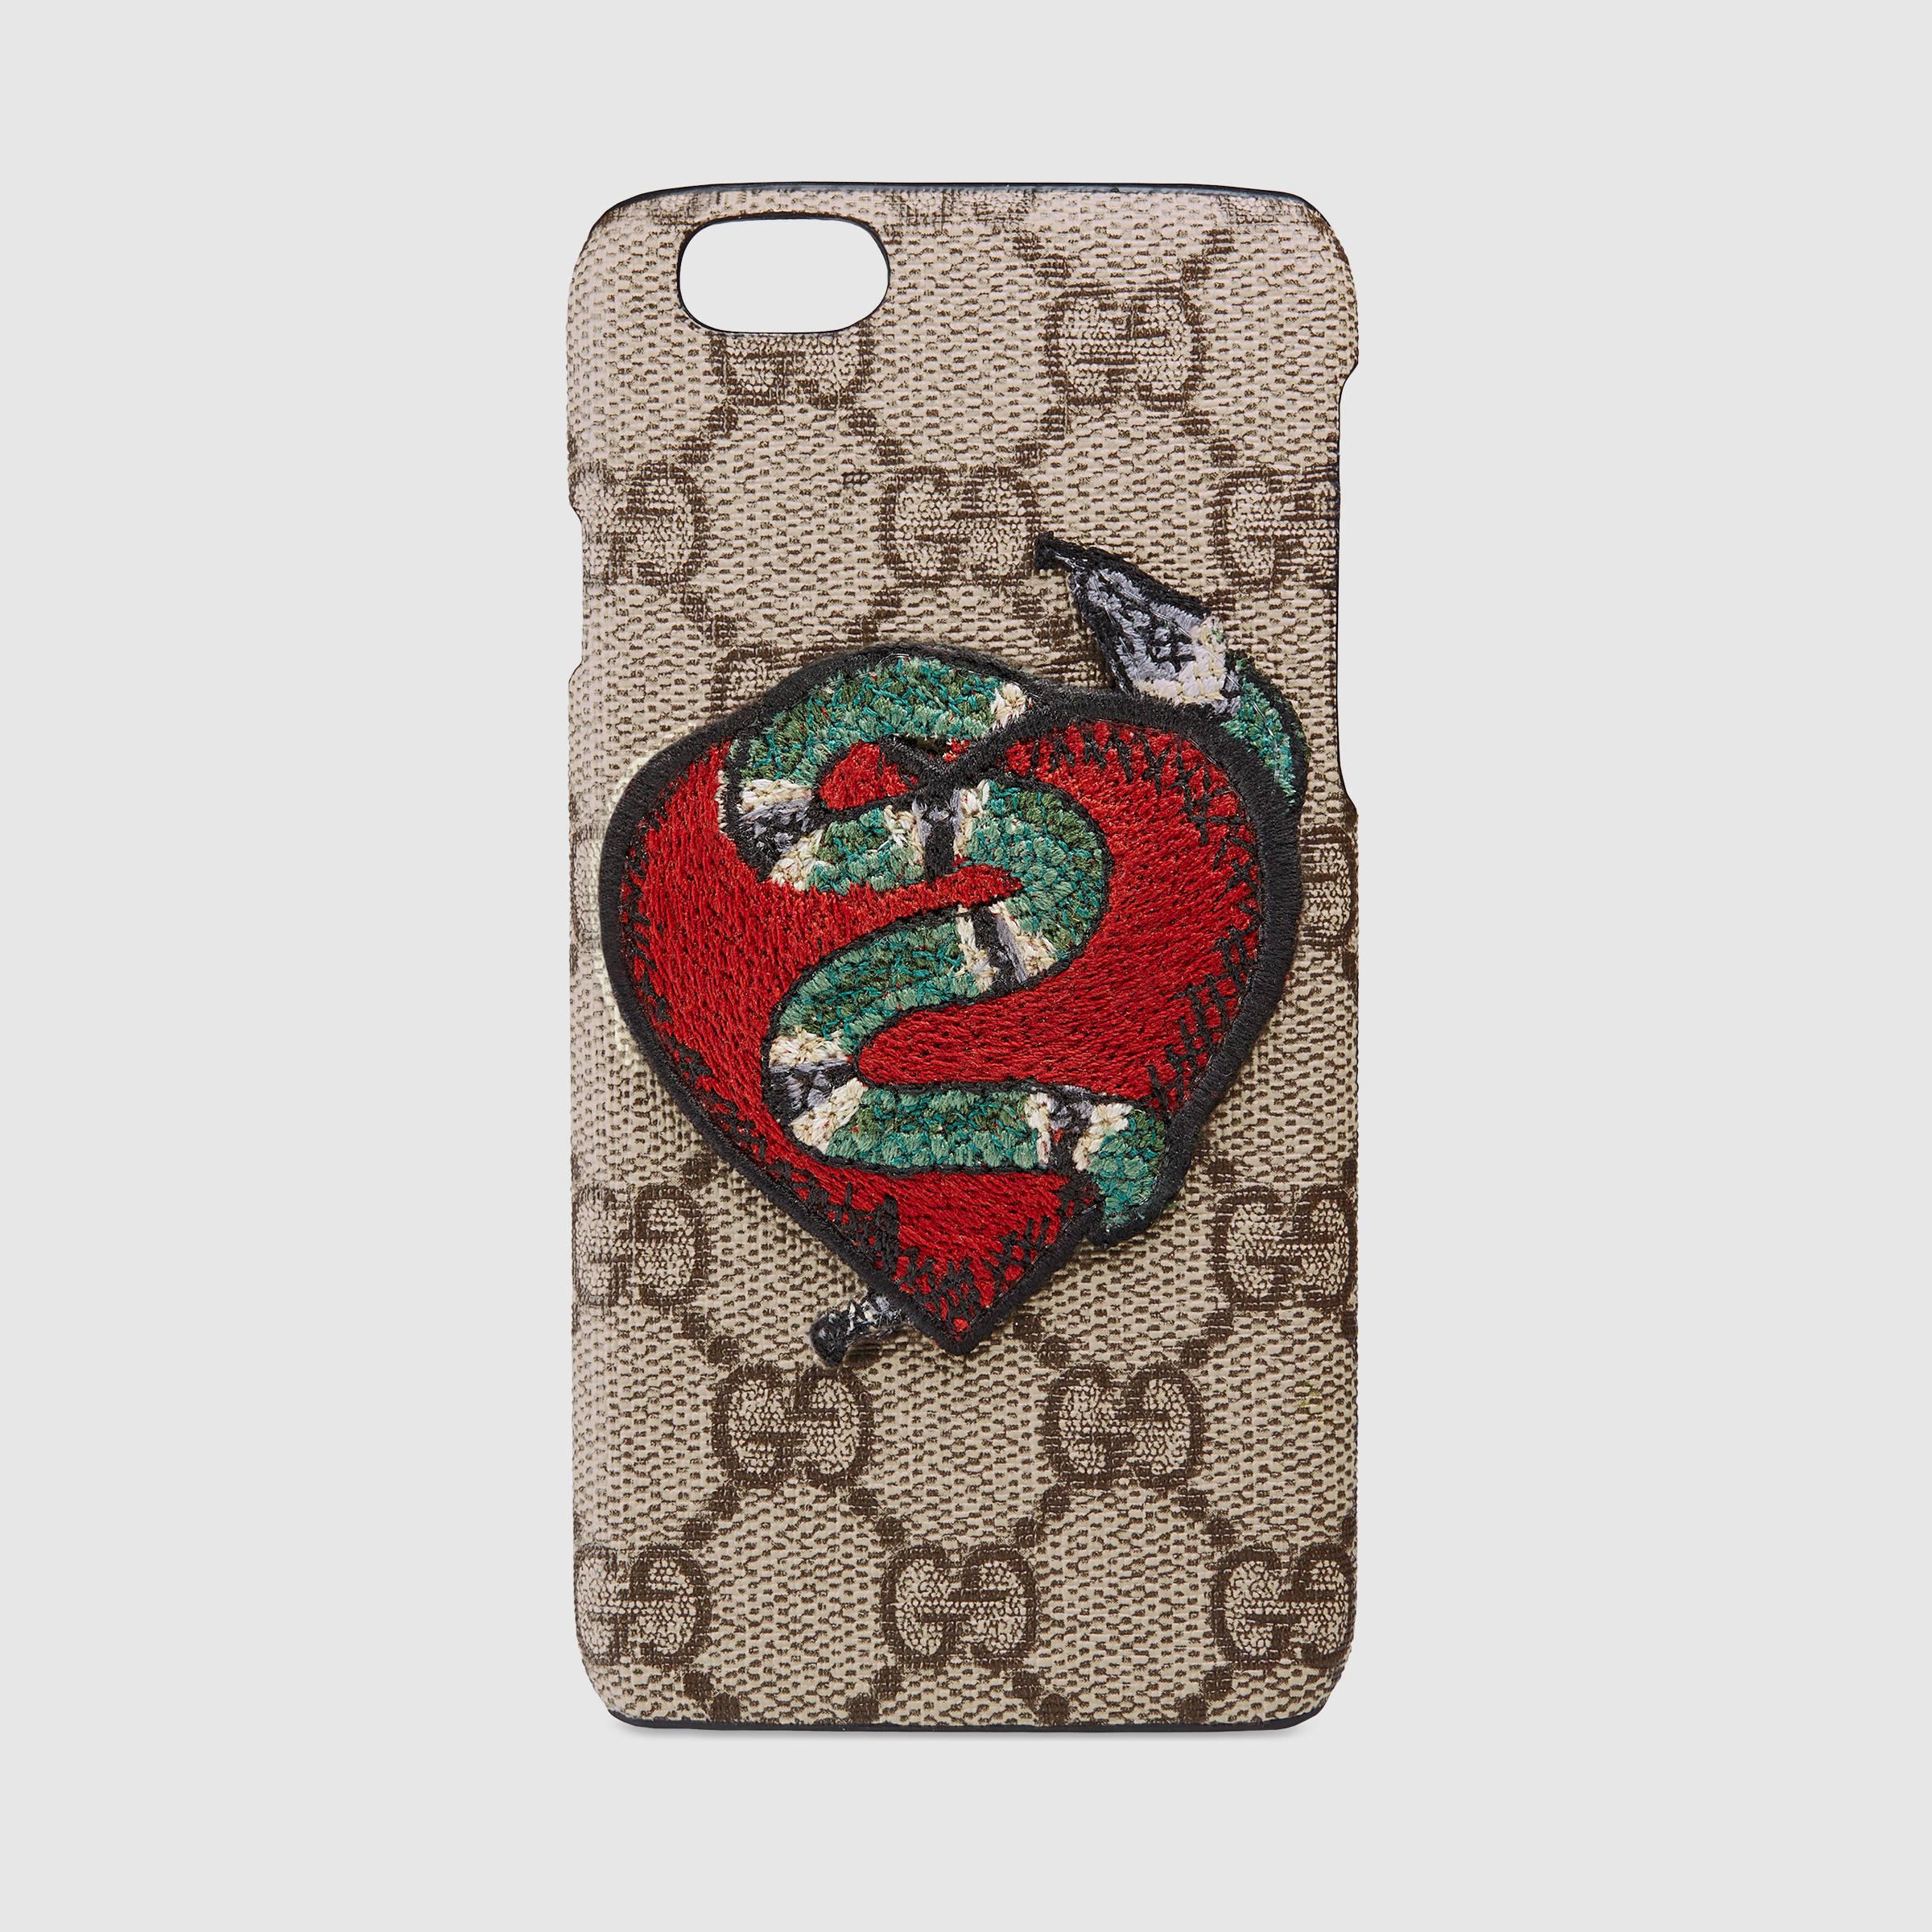 Lyst - Gucci Limited Edition Iphone 6 Case